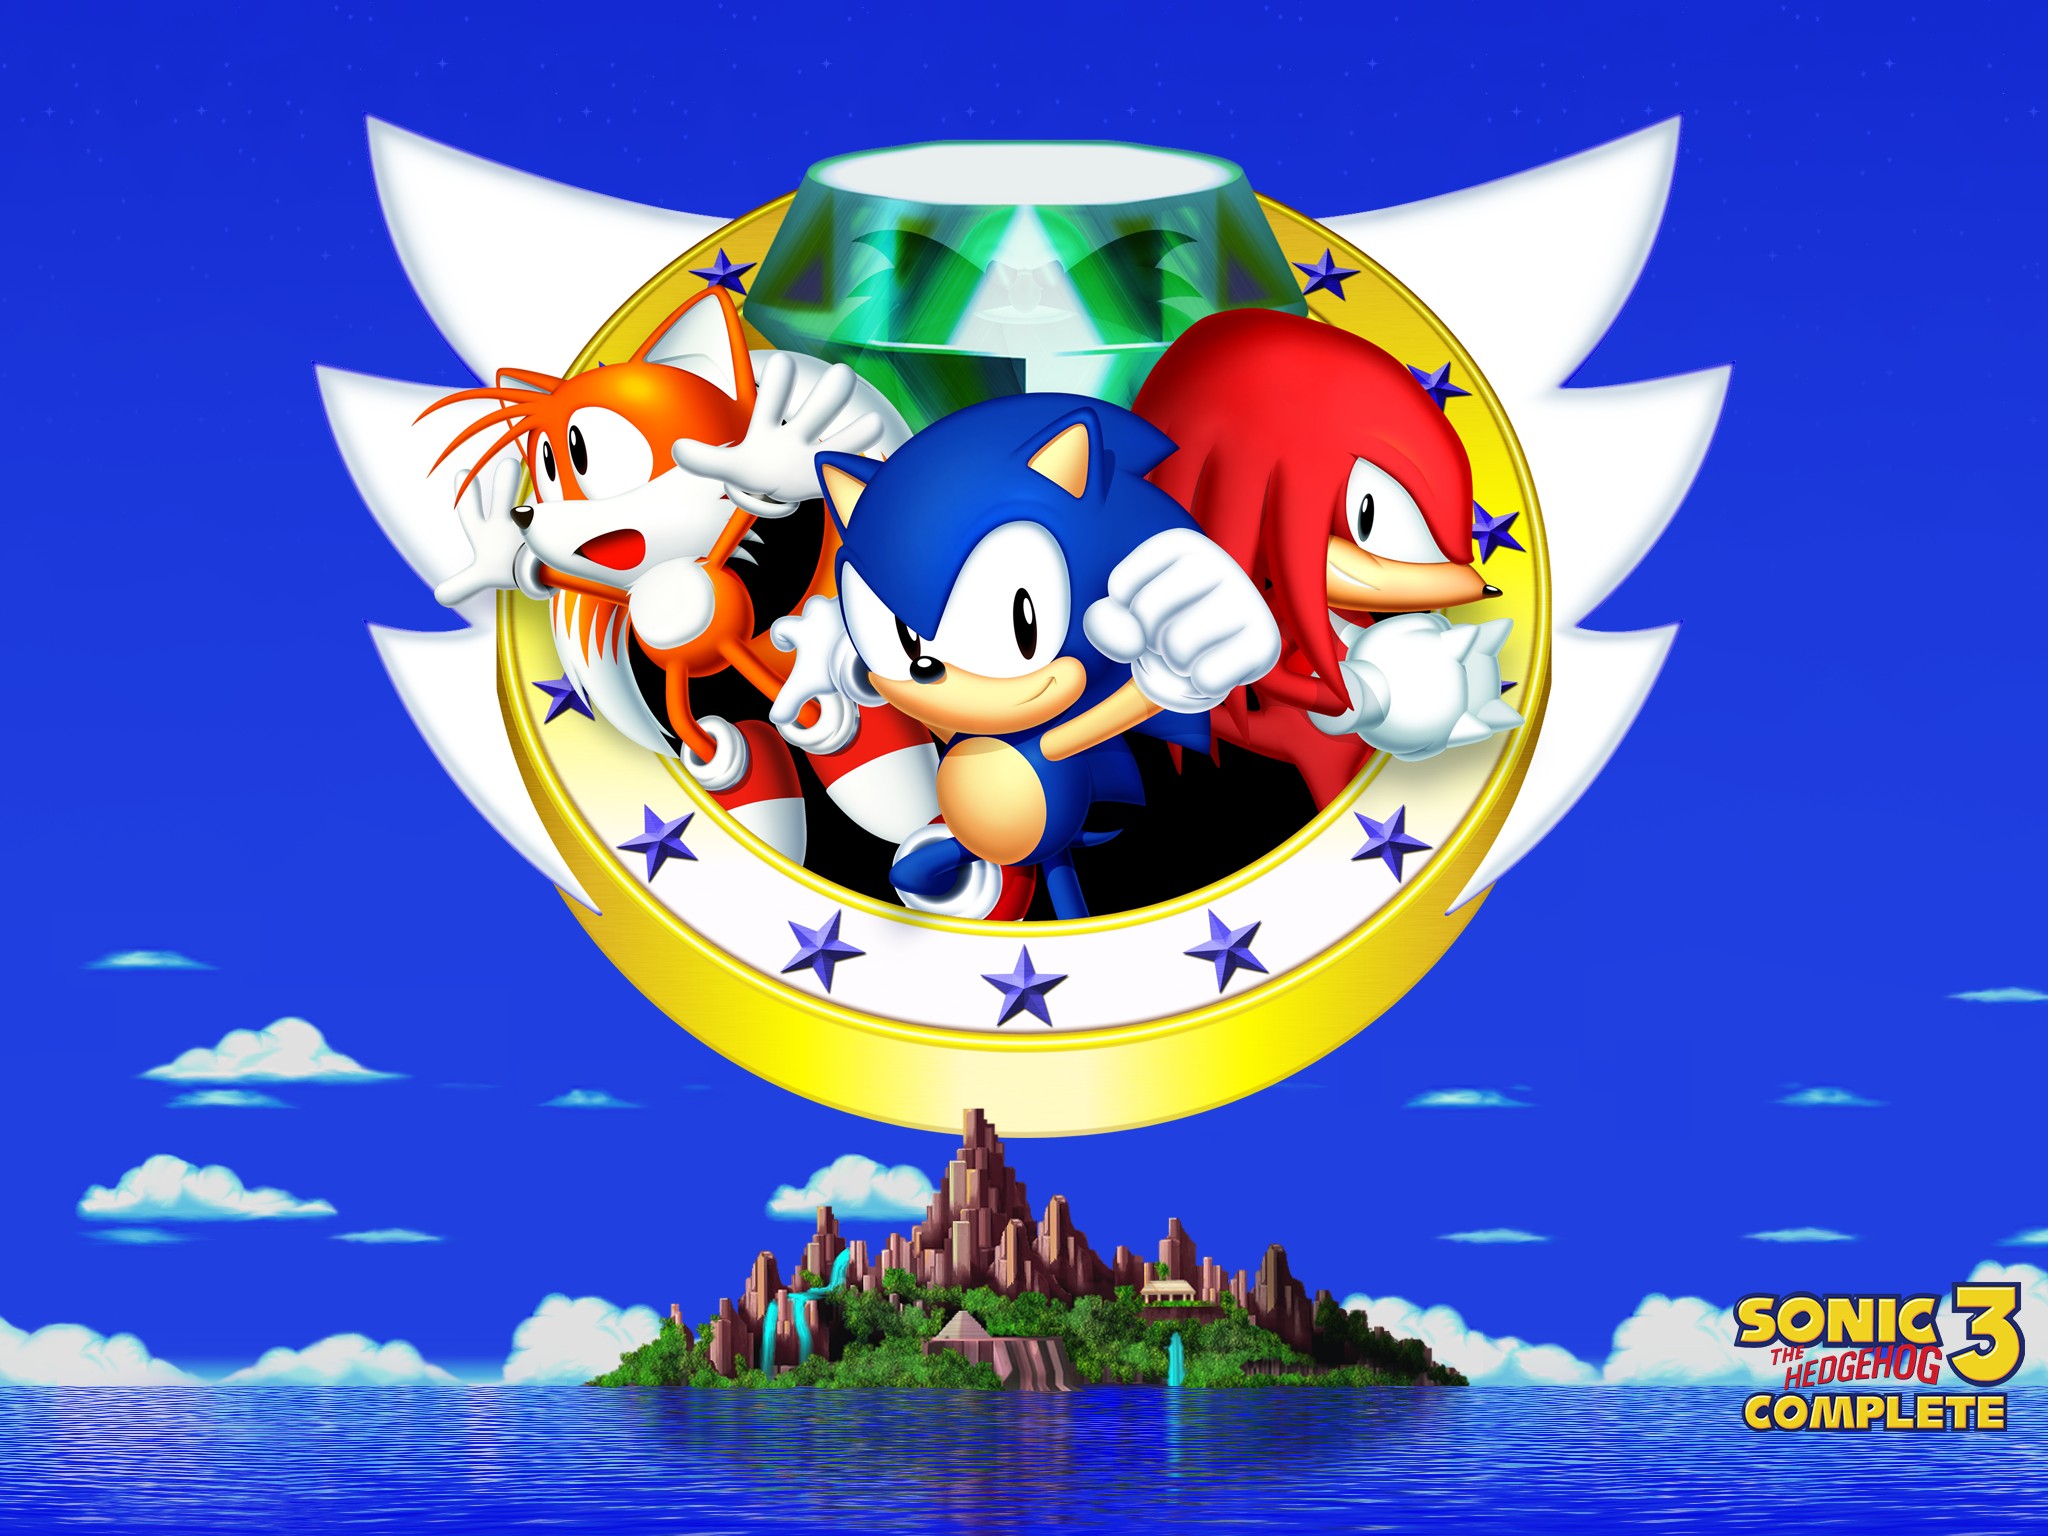 Sonic 3 and Knuckles download the new version for windows